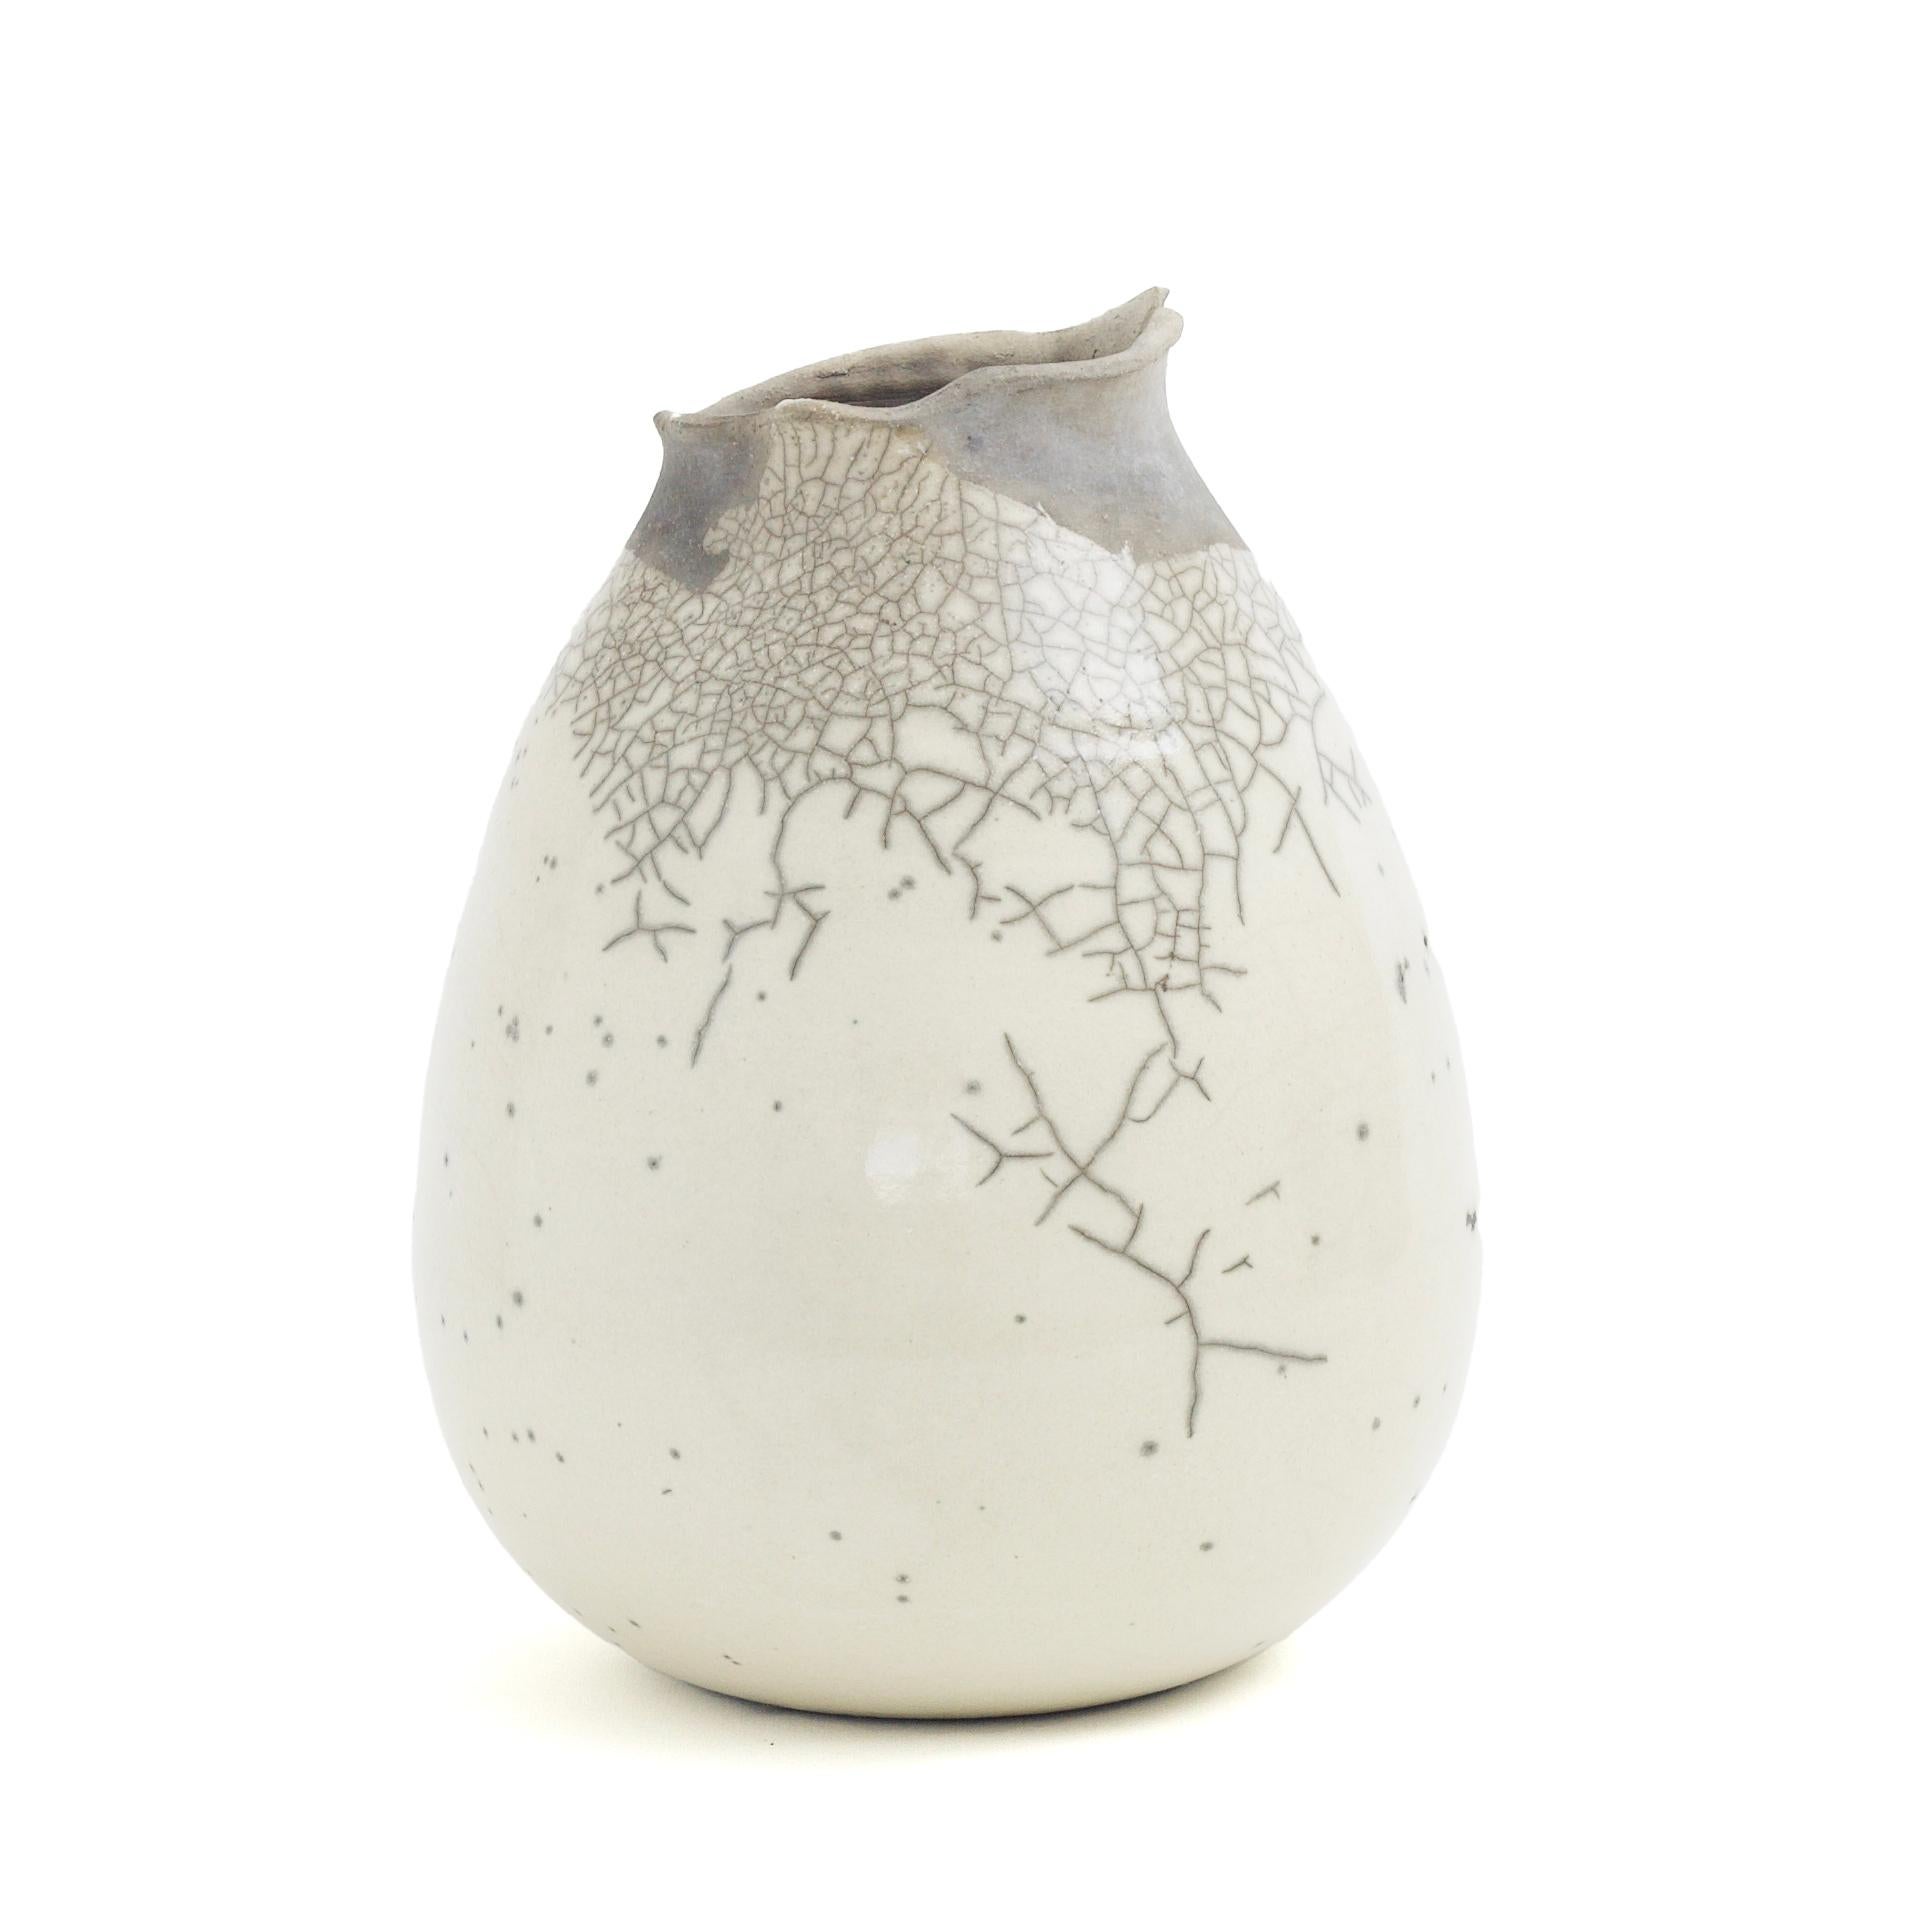 Impermanenza Grey

Defined by an unglazed finish and fluid, irregular aesthetic, this ceramic vase in gray and white will embellish any tabletop with its unique and sophisticated character. The singular crackles adorning the piece result from a